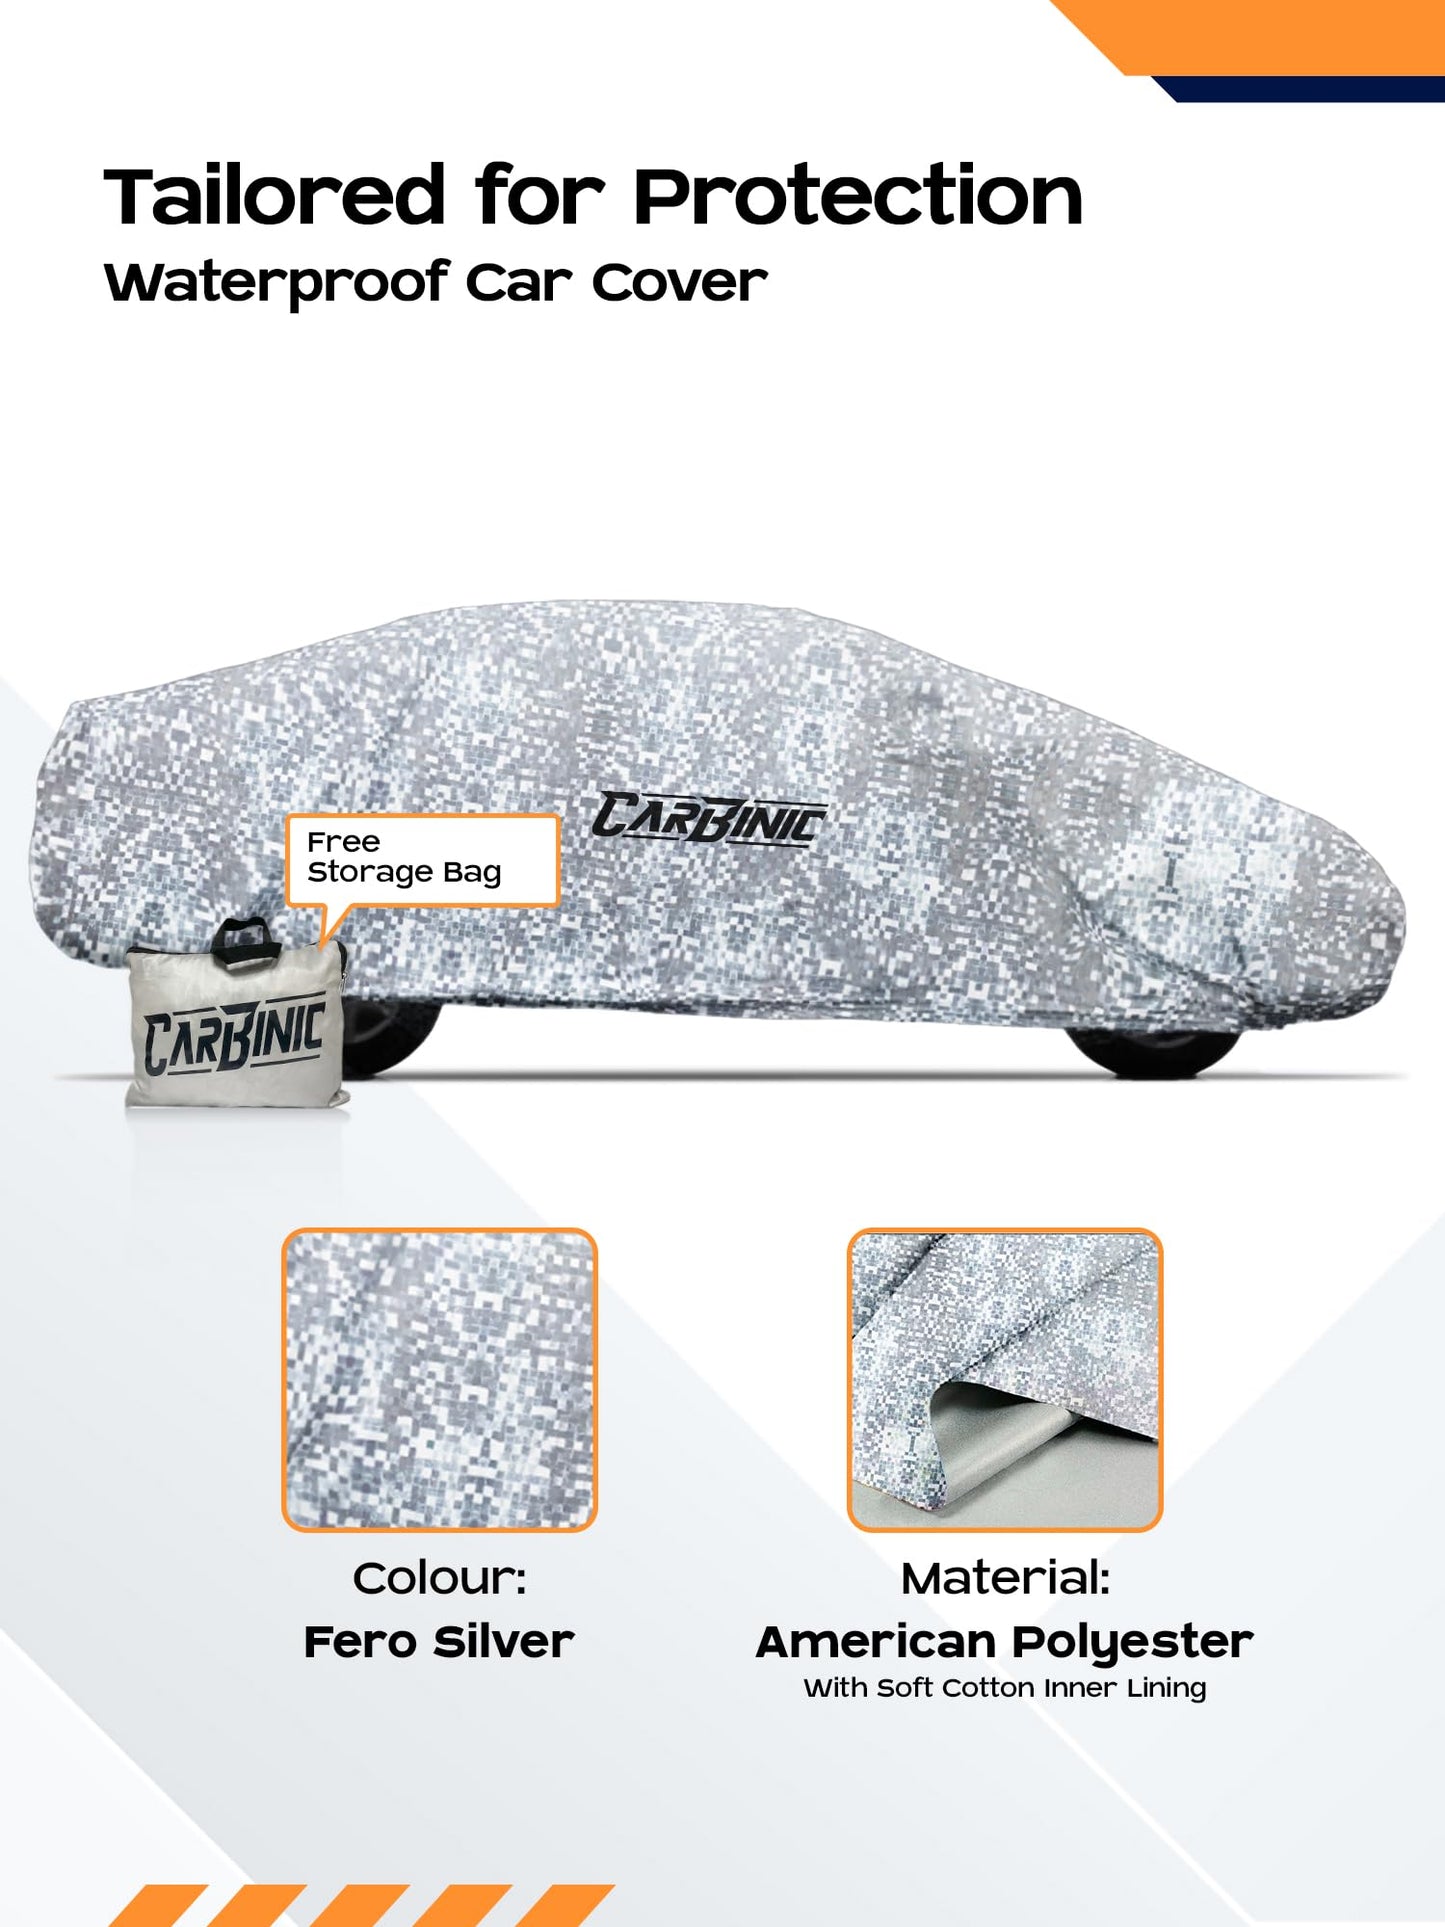 CARBINIC Car Cover for Toyota Hilux2022 Waterproof Tested and Dustproof Custom Fit UV Heat Resistant Outdoor Protection with Triple Stitched Fully Elastic Surface  Silver with Pockets